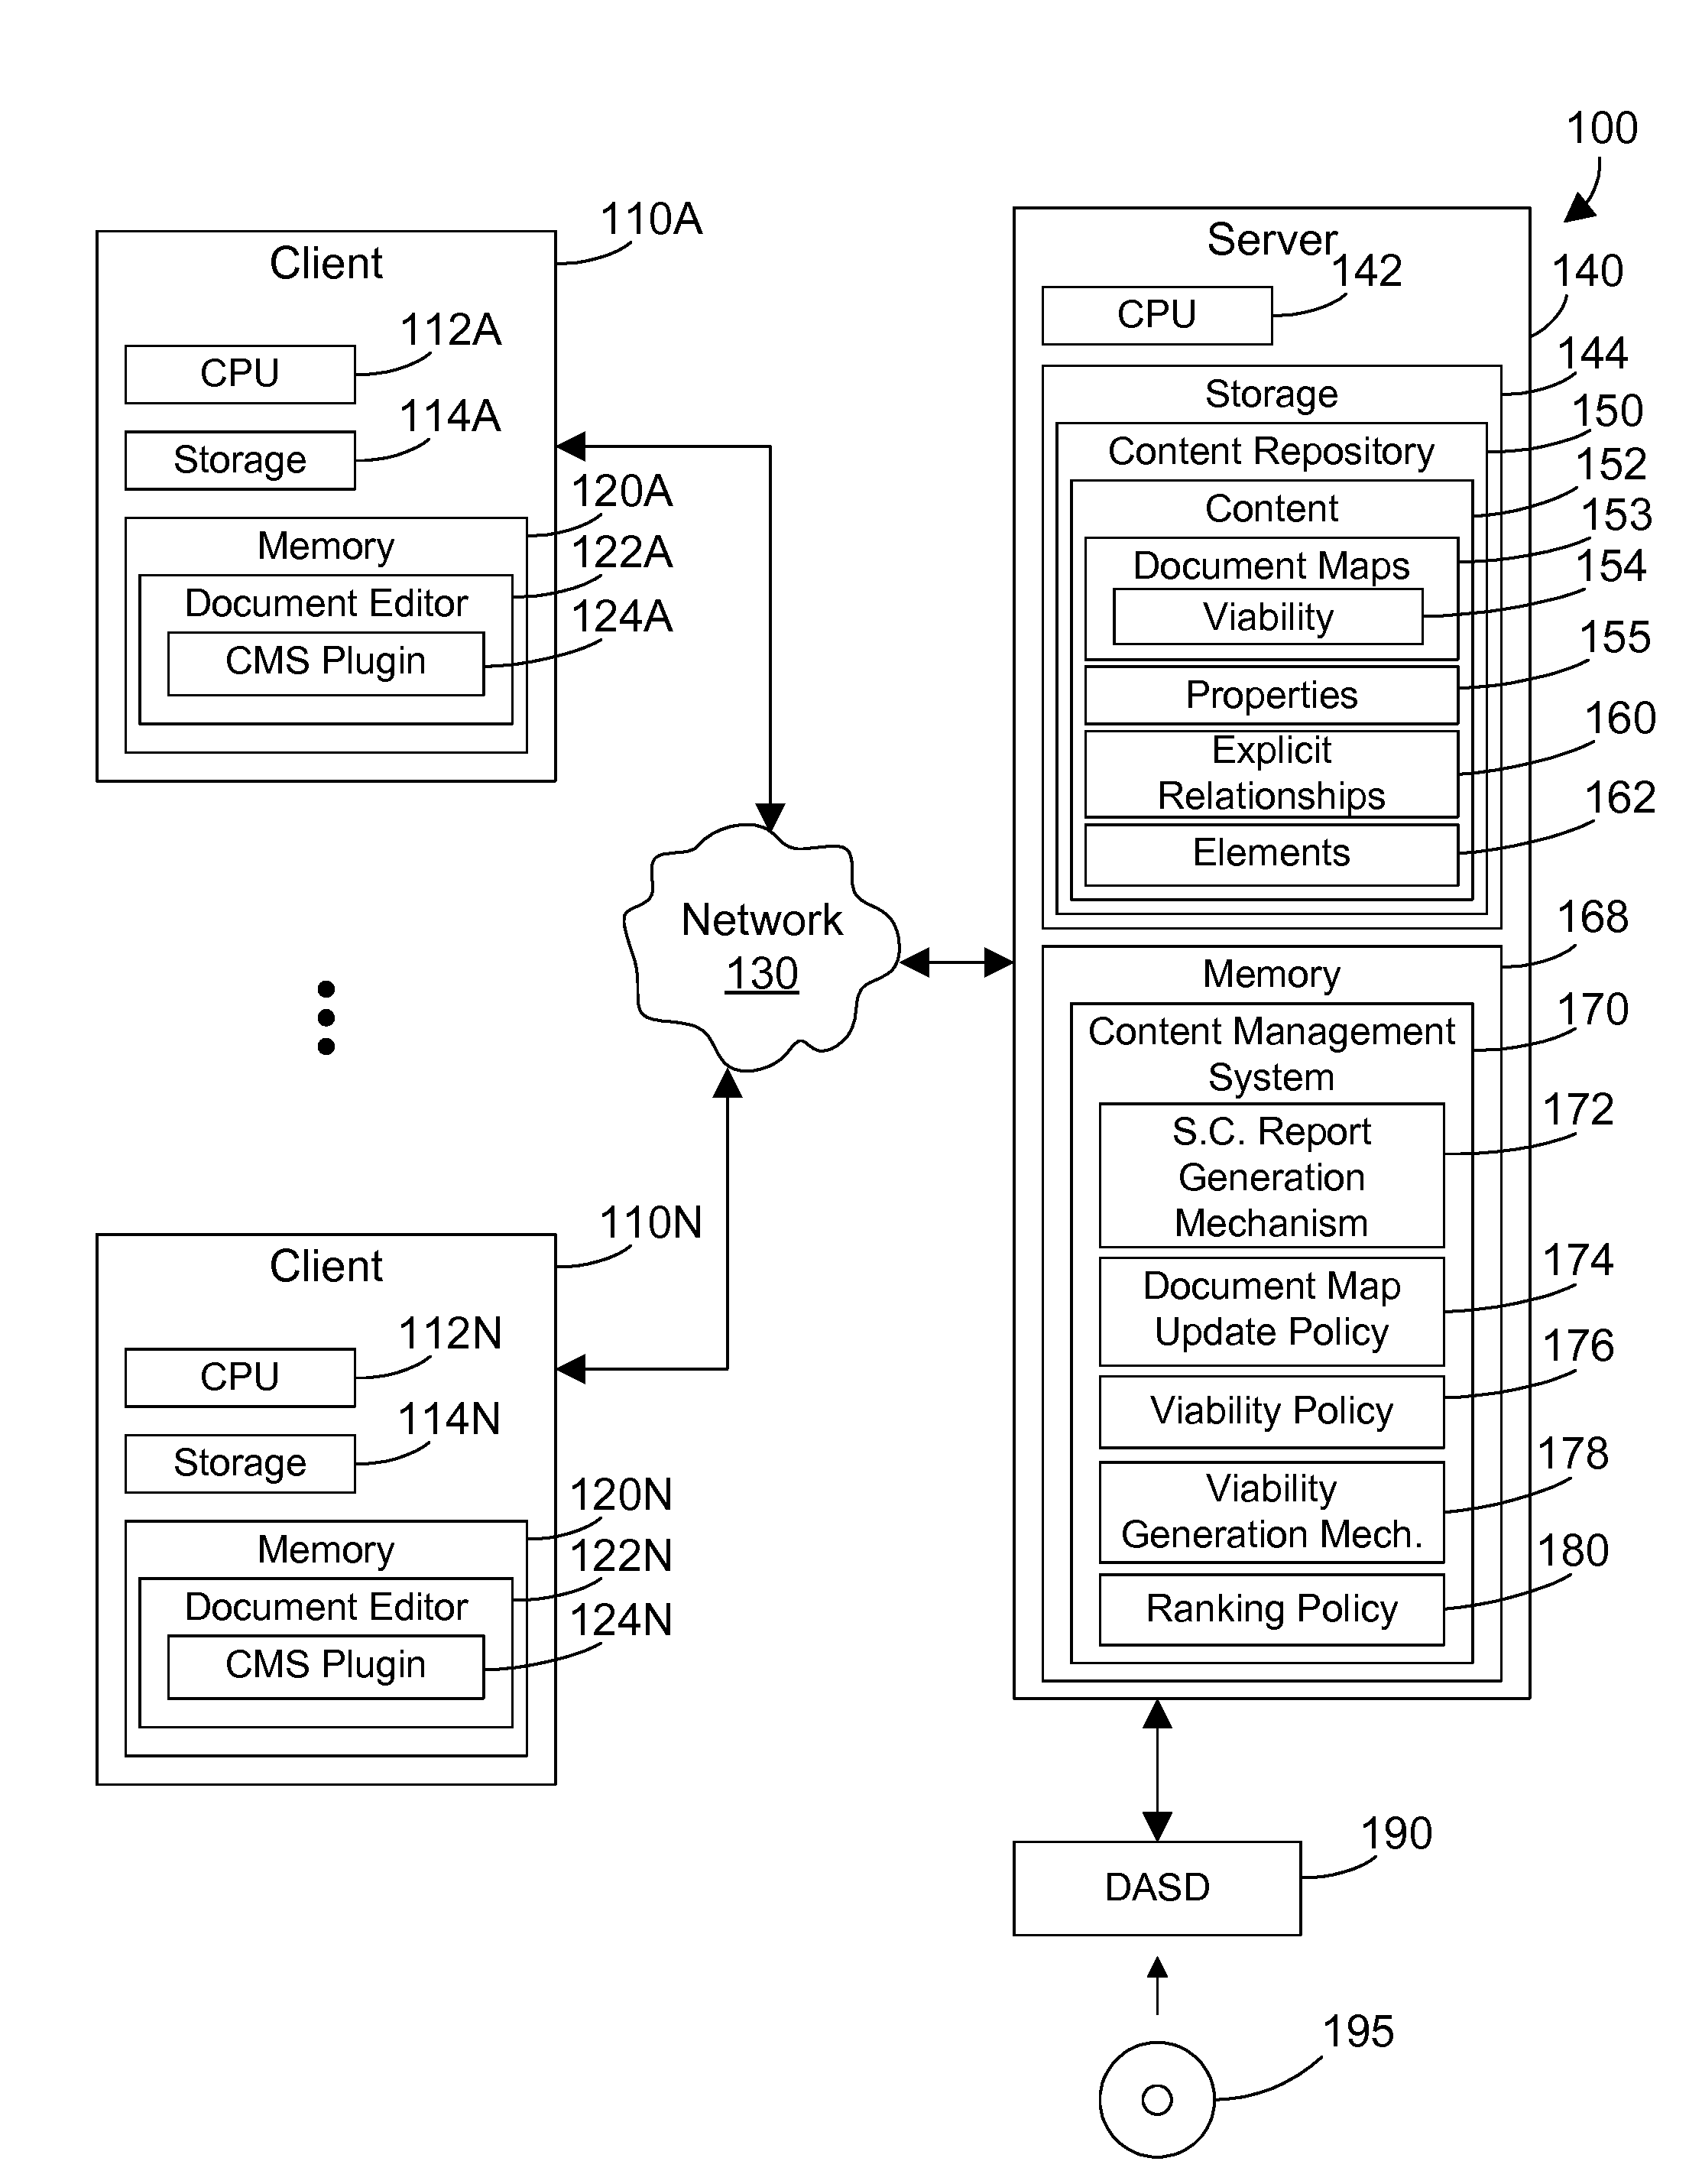 Generating Simulated Containment Reports of Dynamically Assembled Components in a Content Management System